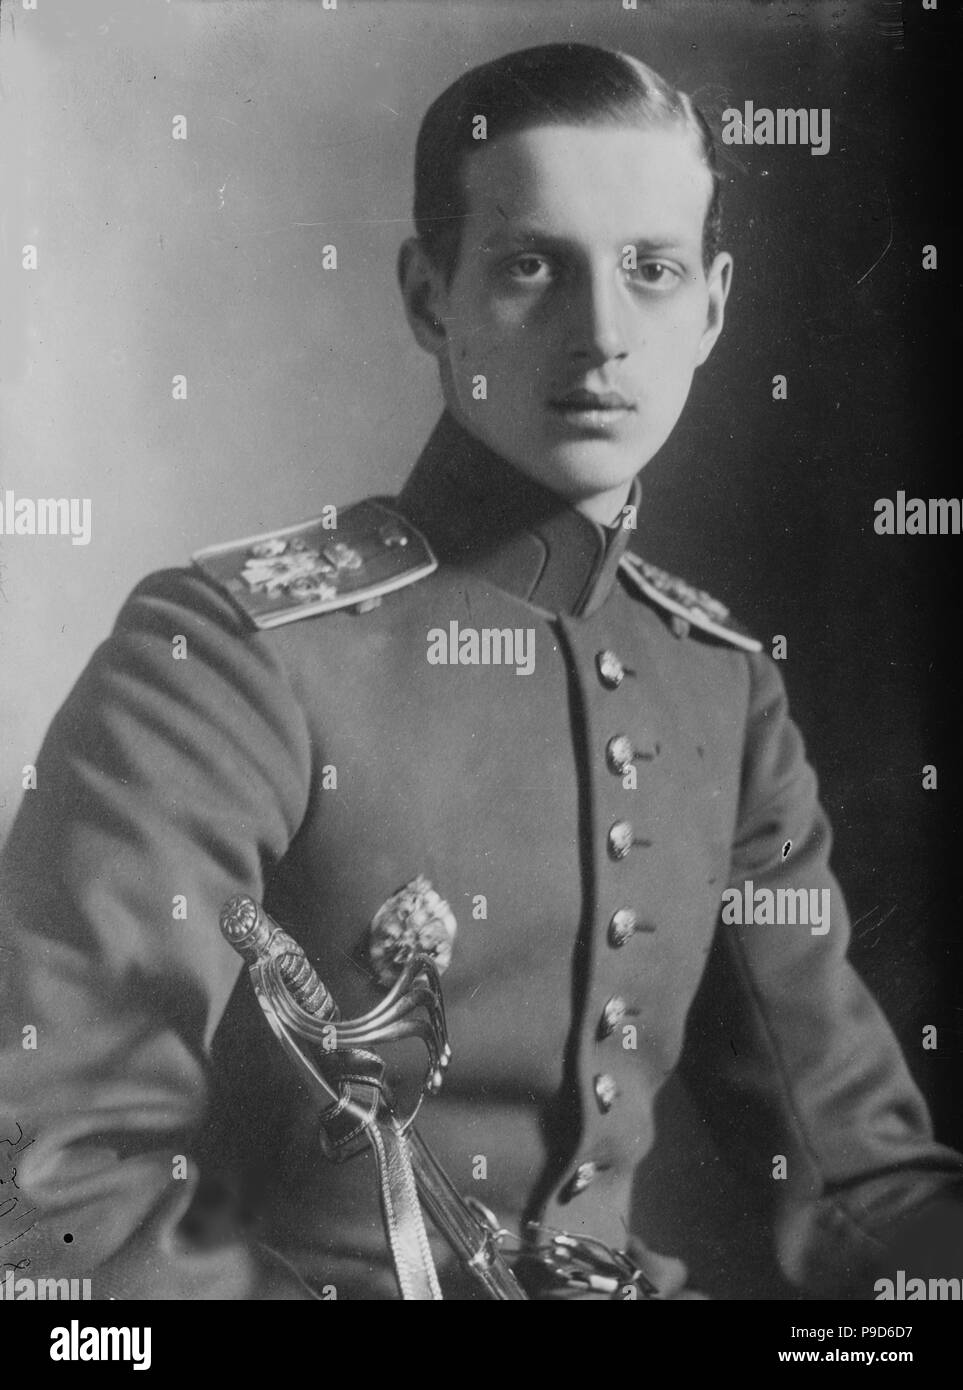 Grand Duke Dmitri Pavlovich of Russia (1891-1941). Museum: State Central Museum of Contemporary History of Russia, Moscow. Stock Photo